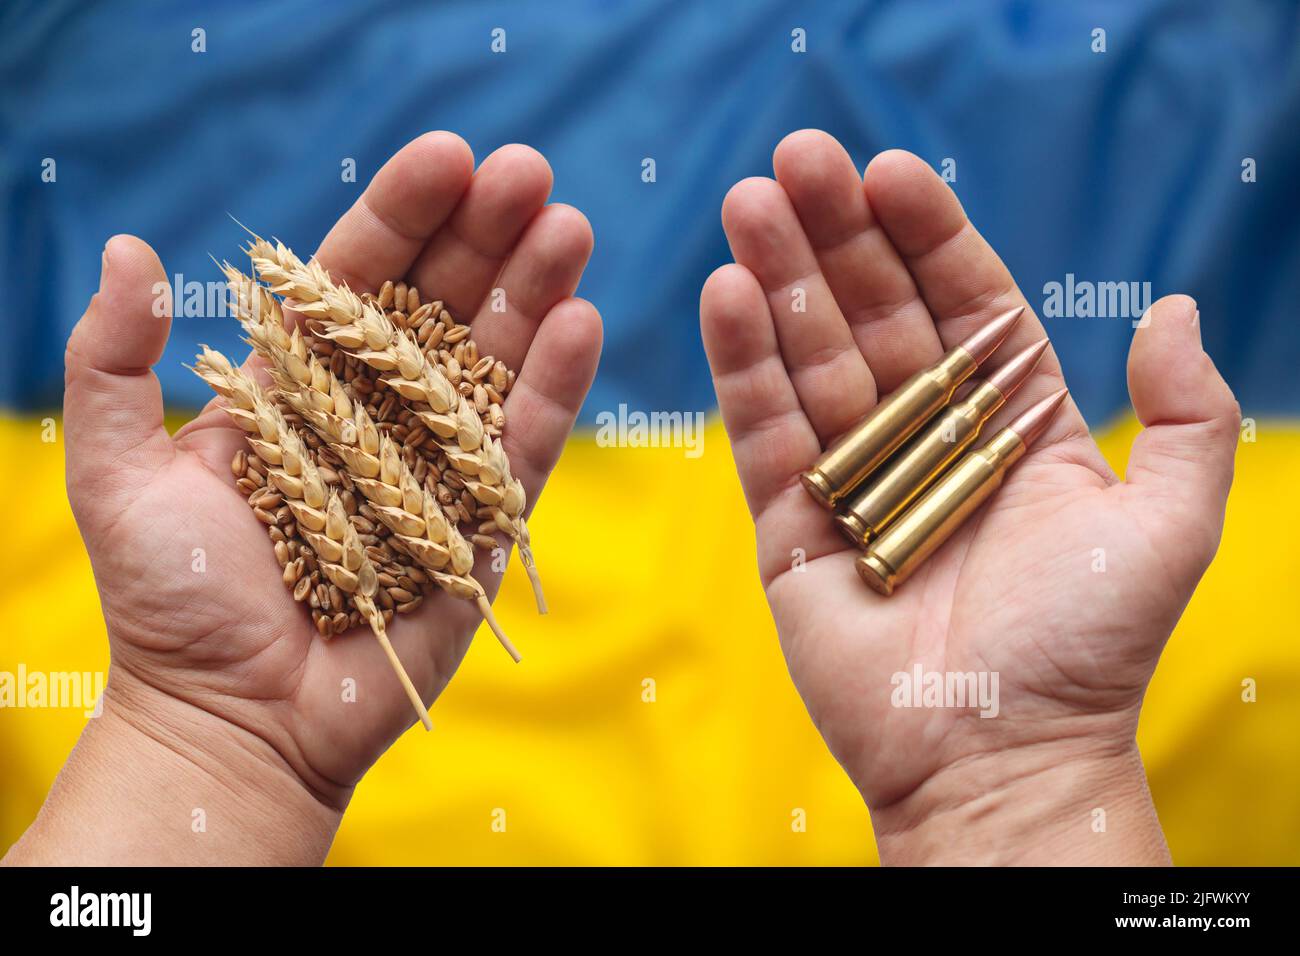 Potential food crisis caused by the war in Ukraine. Hands holding wheat grain and ammunition, Ukraine flag in the background. Concept. Stock Photo